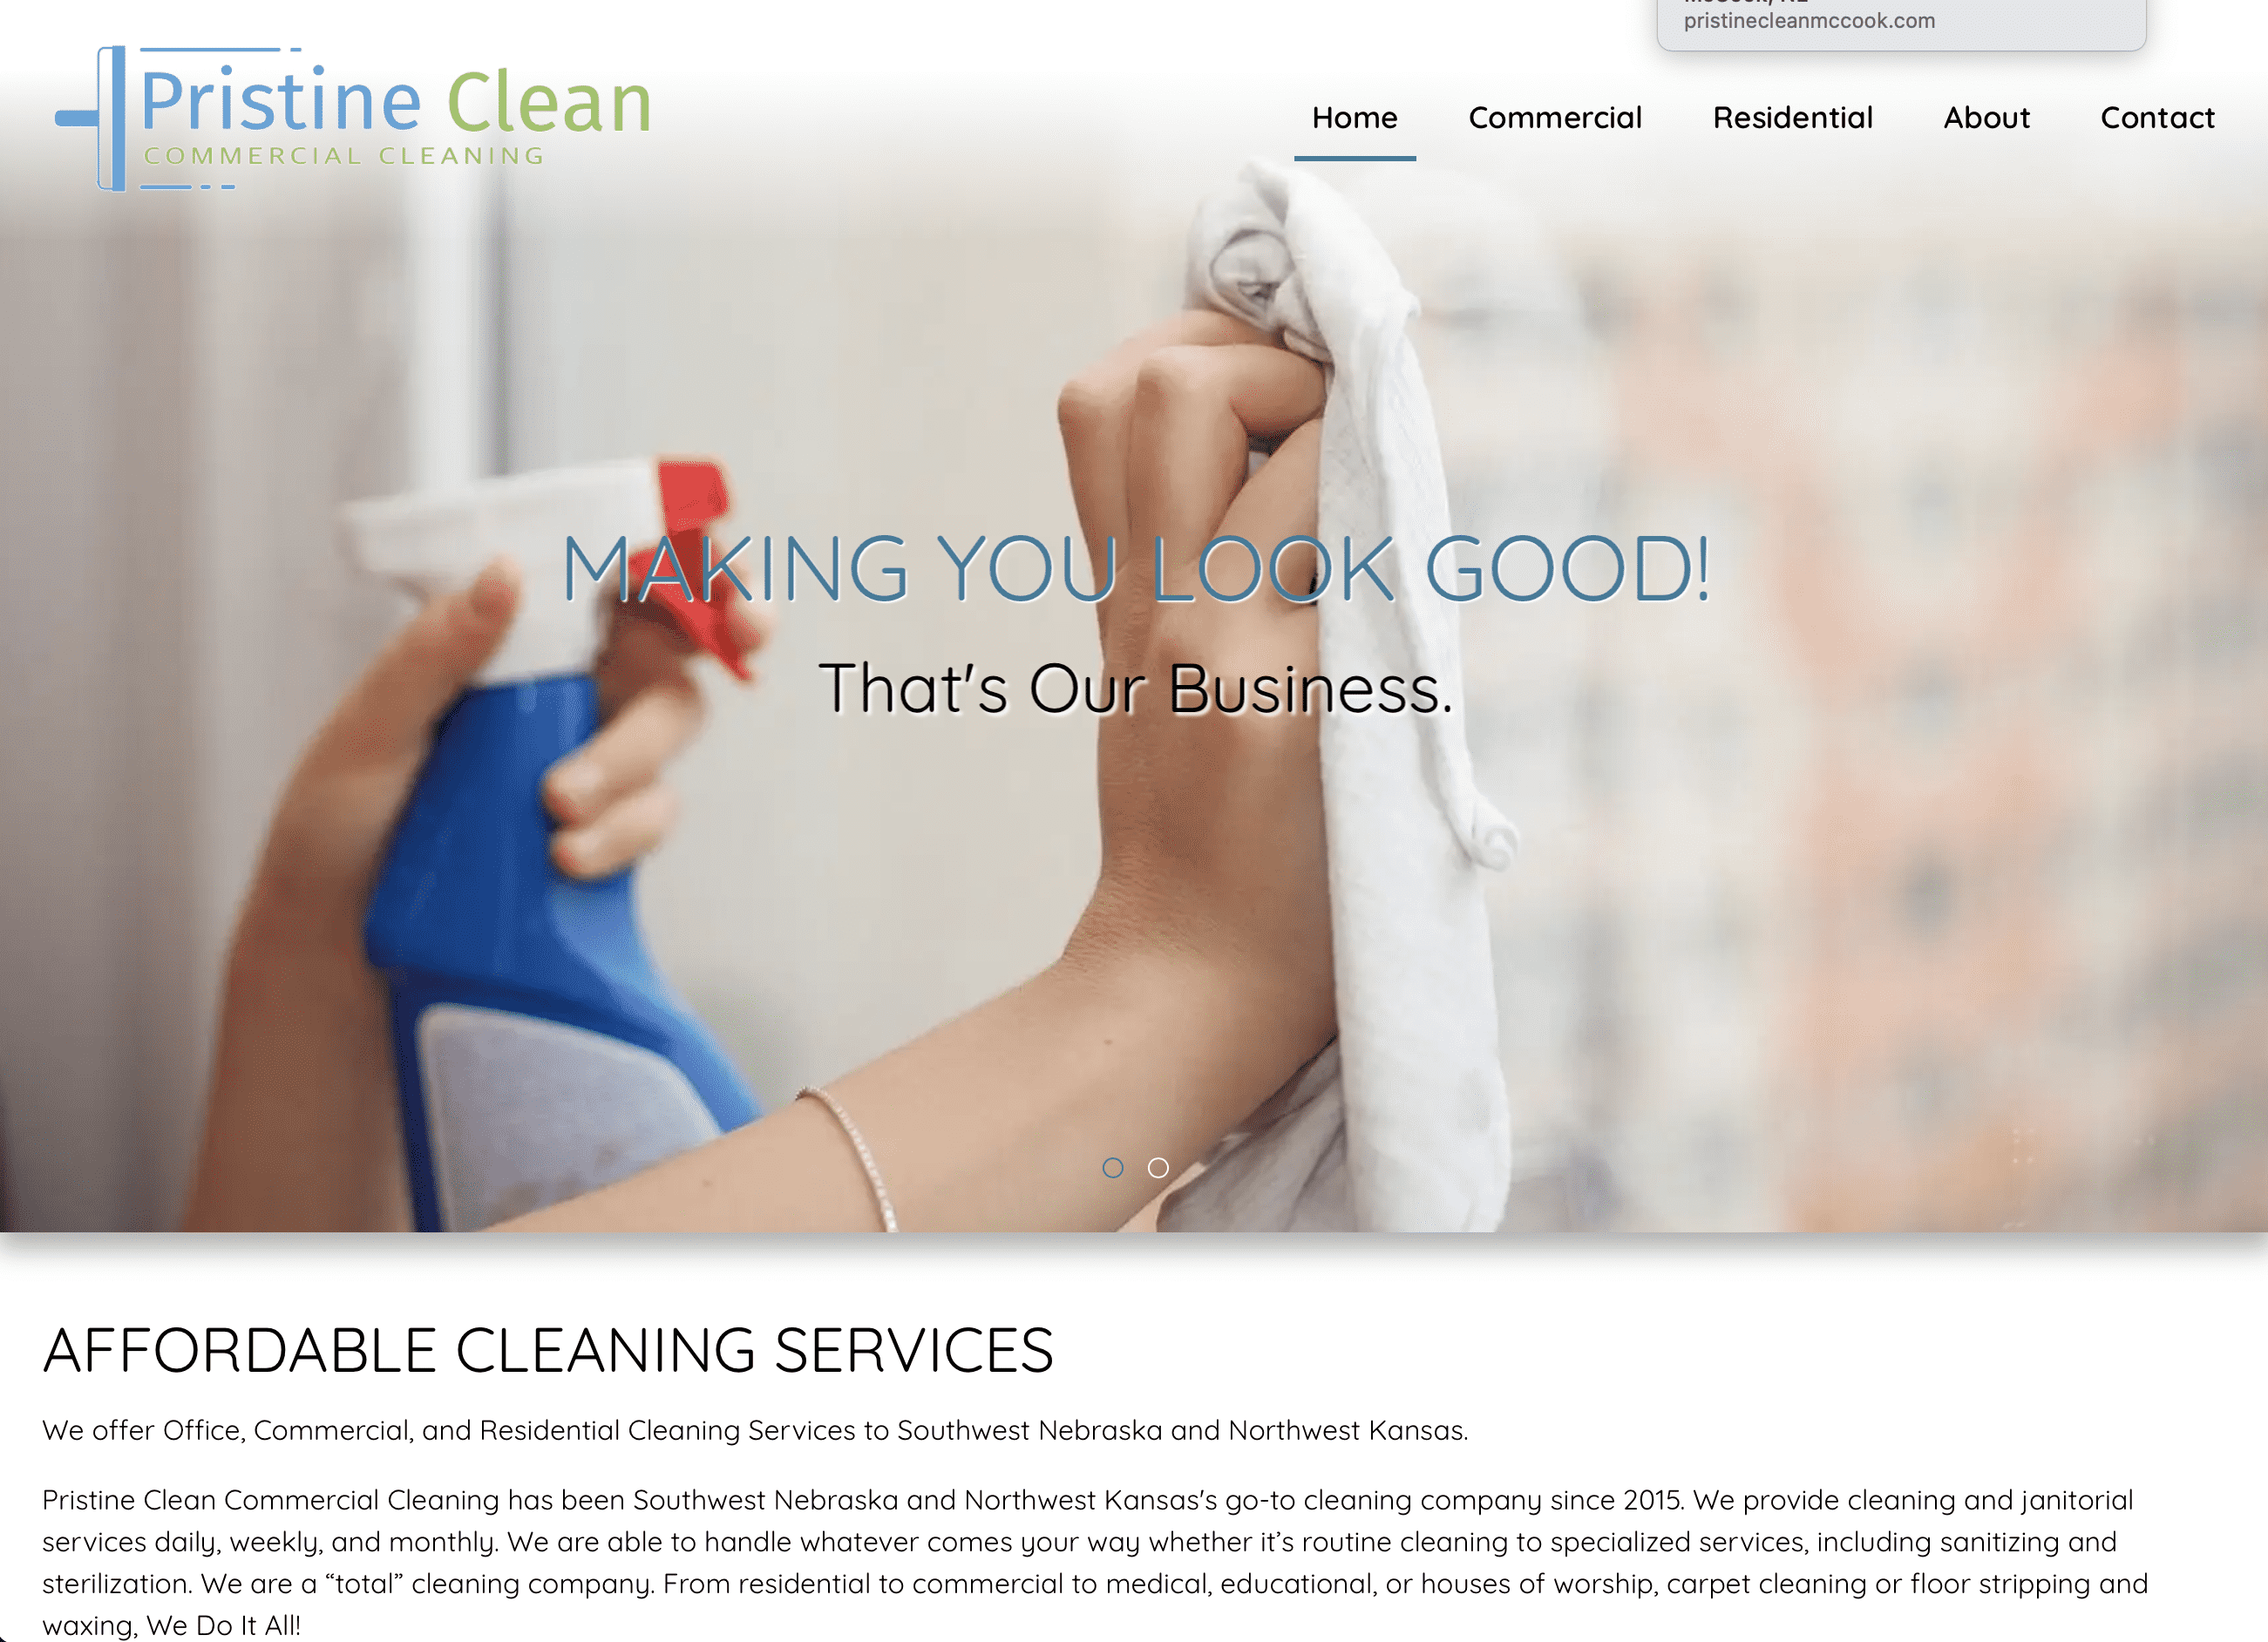 Pristine Clean Cleaning Service Website After